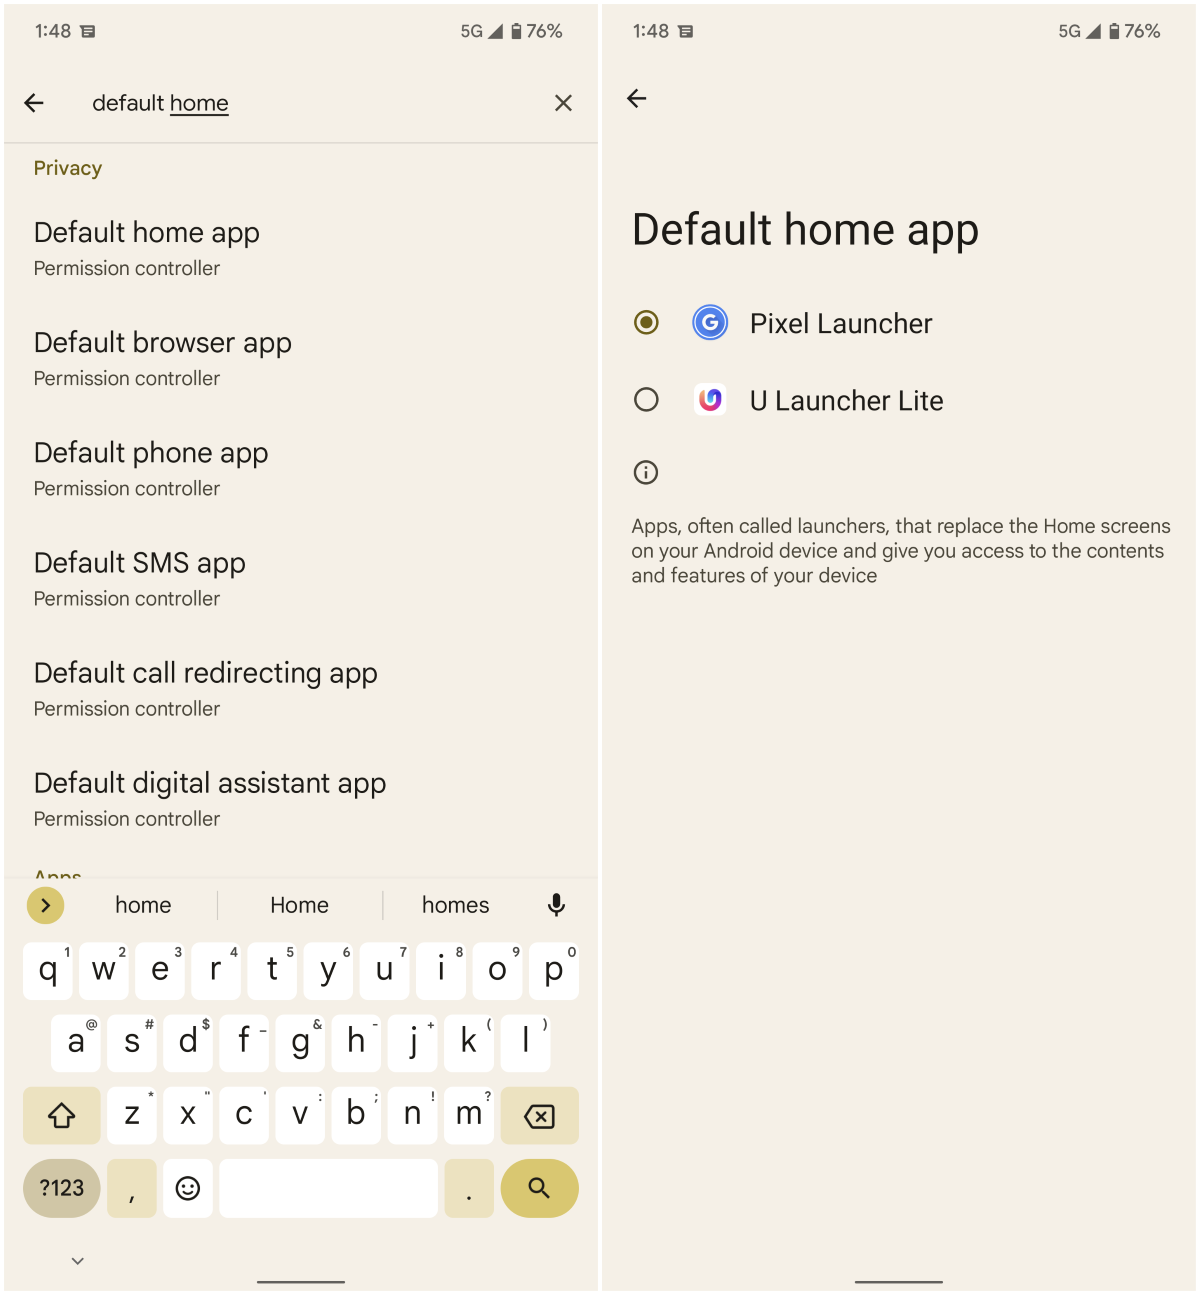 Default home app in Android